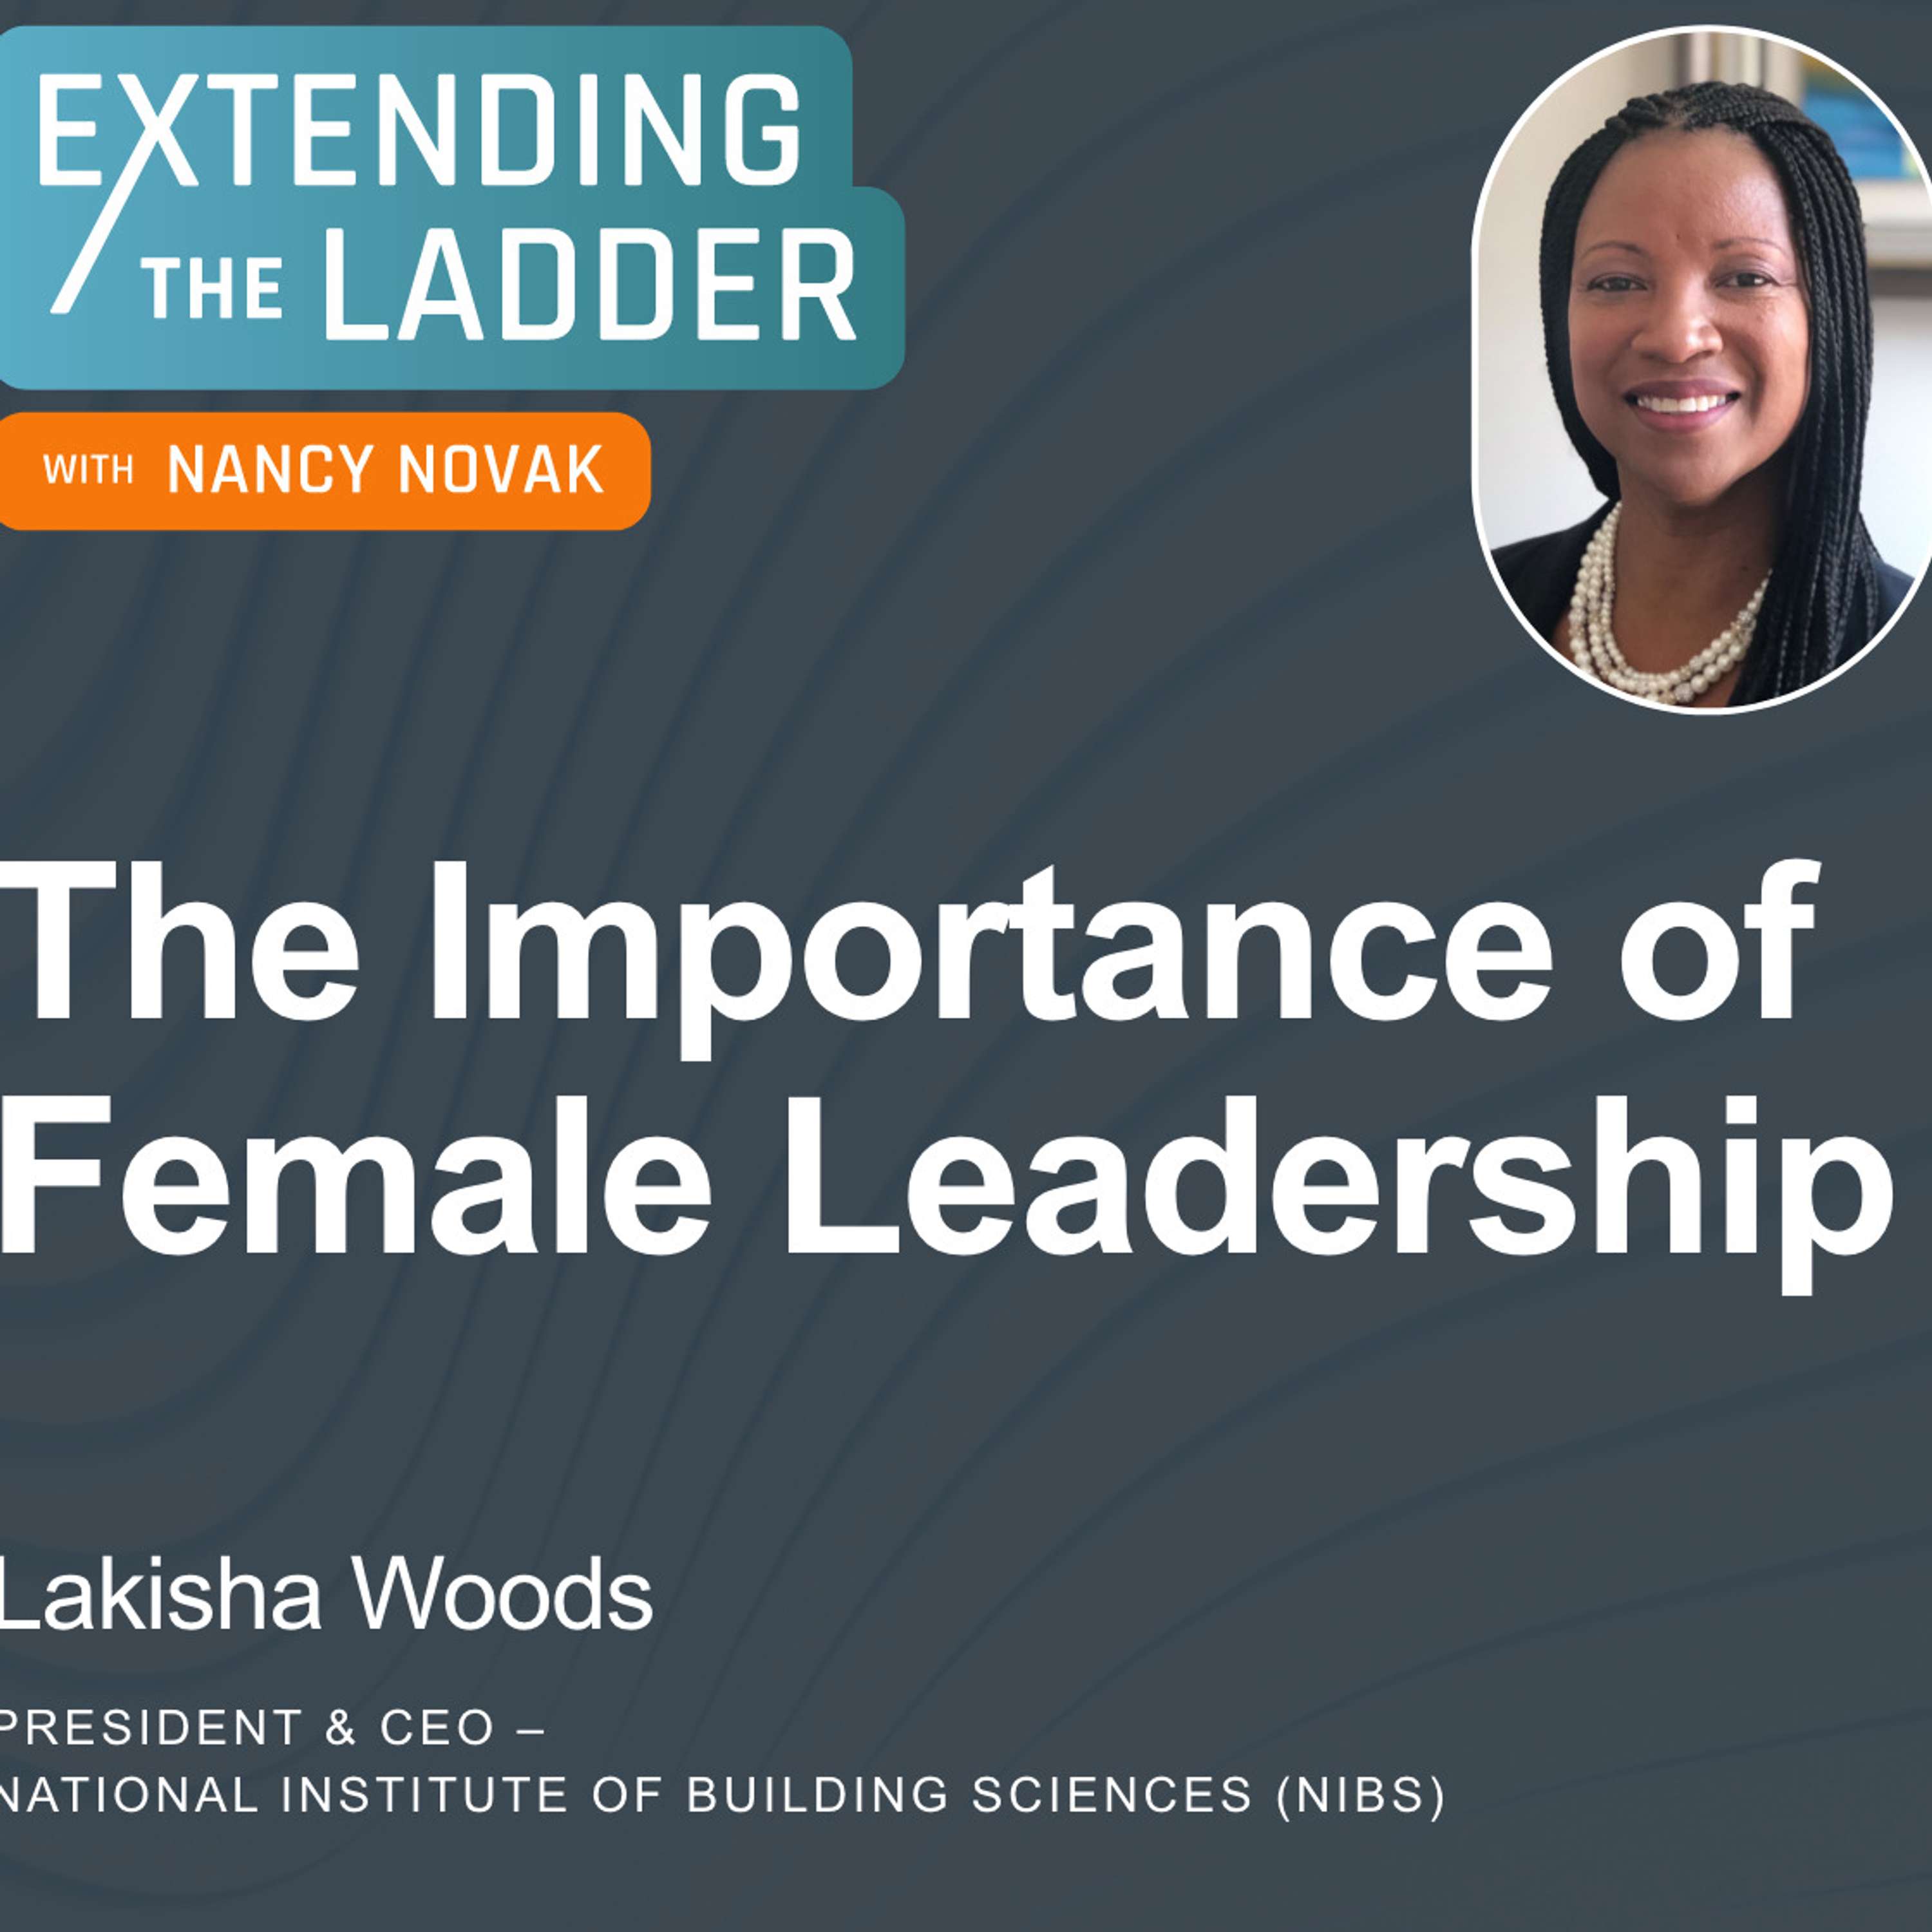 The Importance of Female Leadership